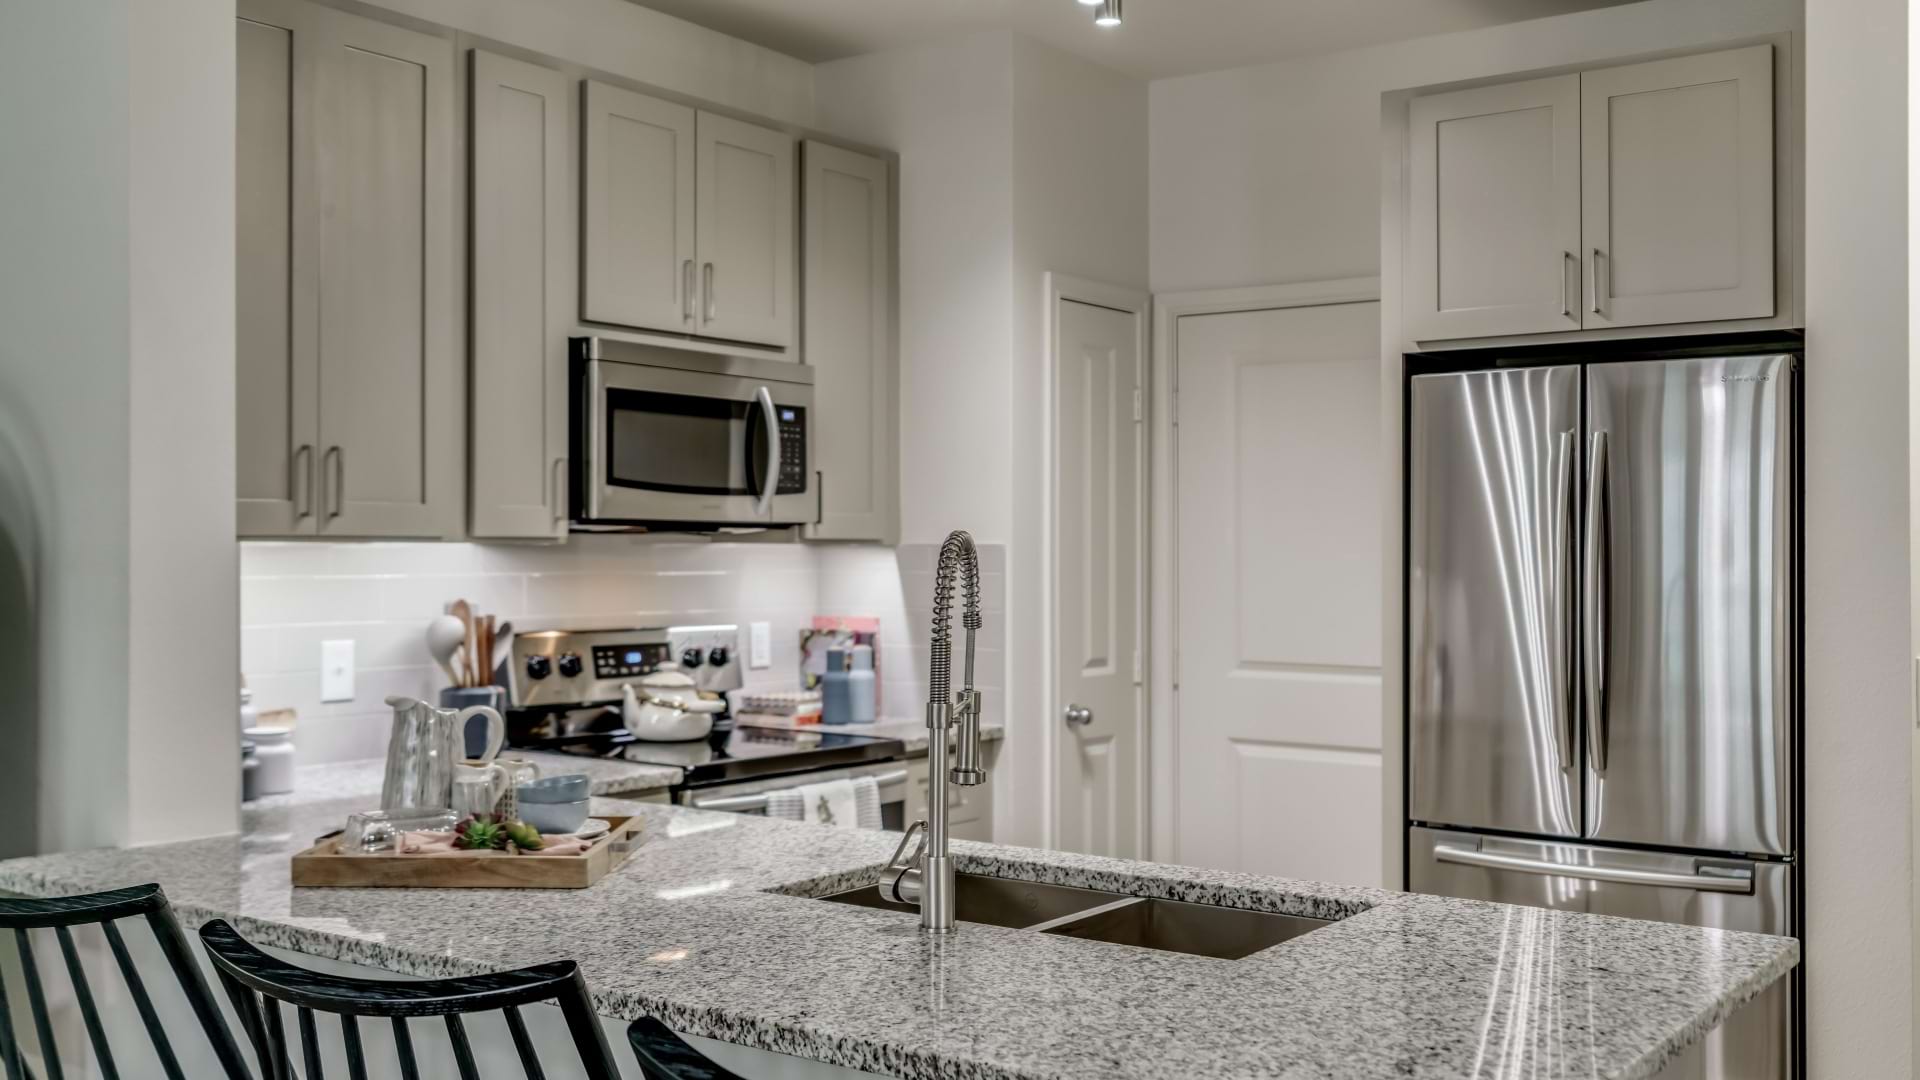 White-theme kitchen with stainless steel appliances at our luxury apartments near Las Colinas